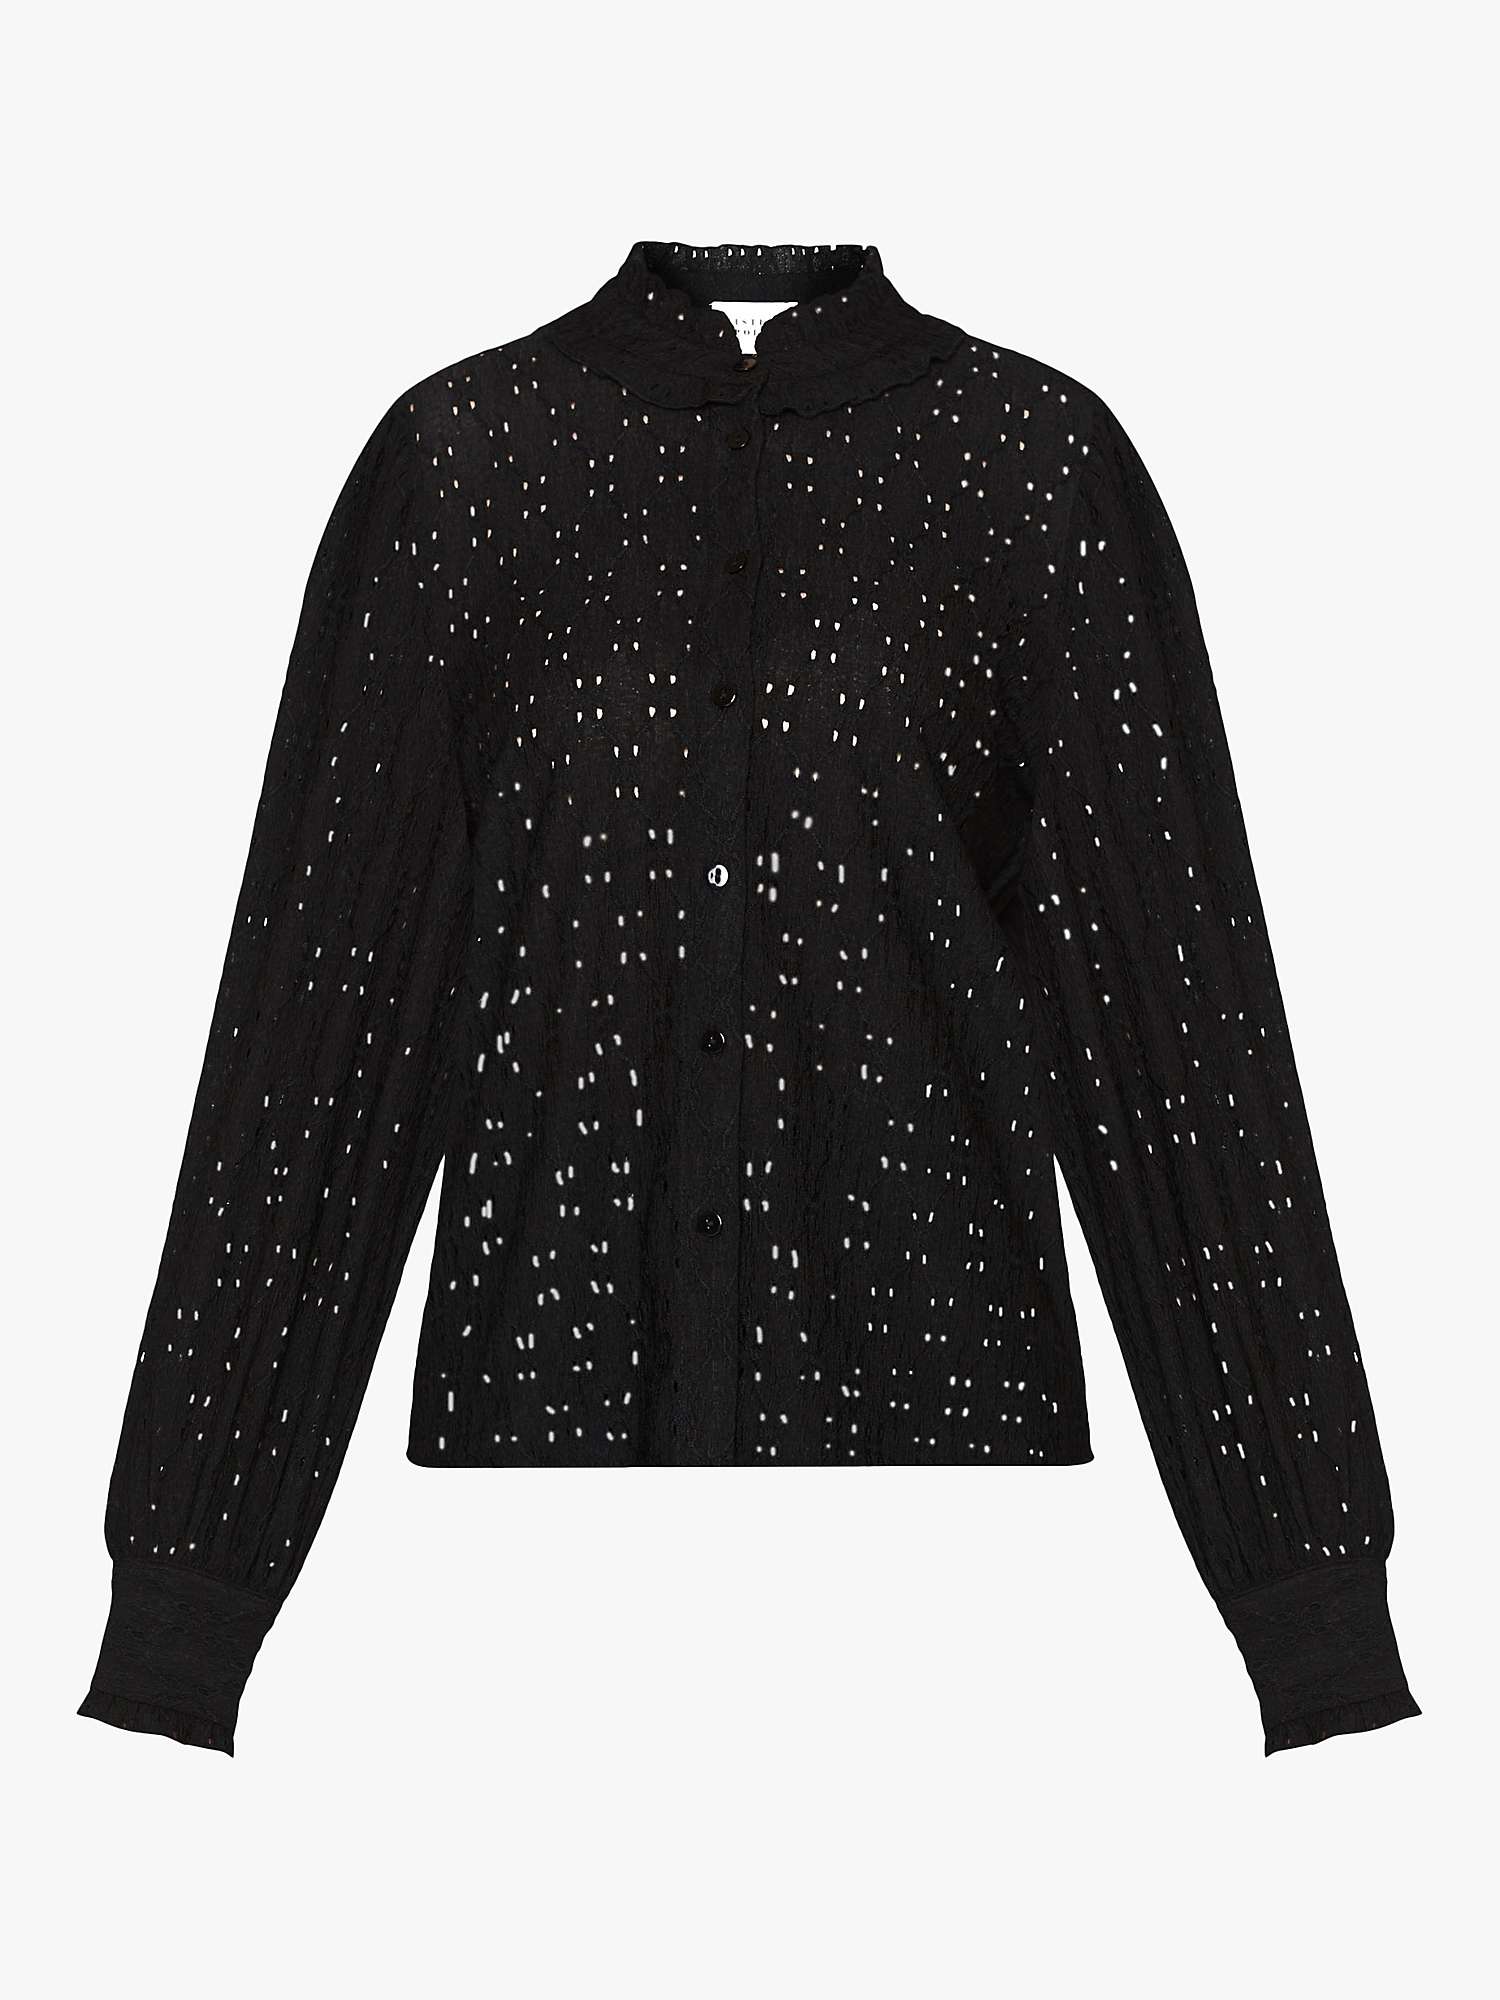 Buy Sisters Point Eina Textured Frill Collar Blouse Online at johnlewis.com